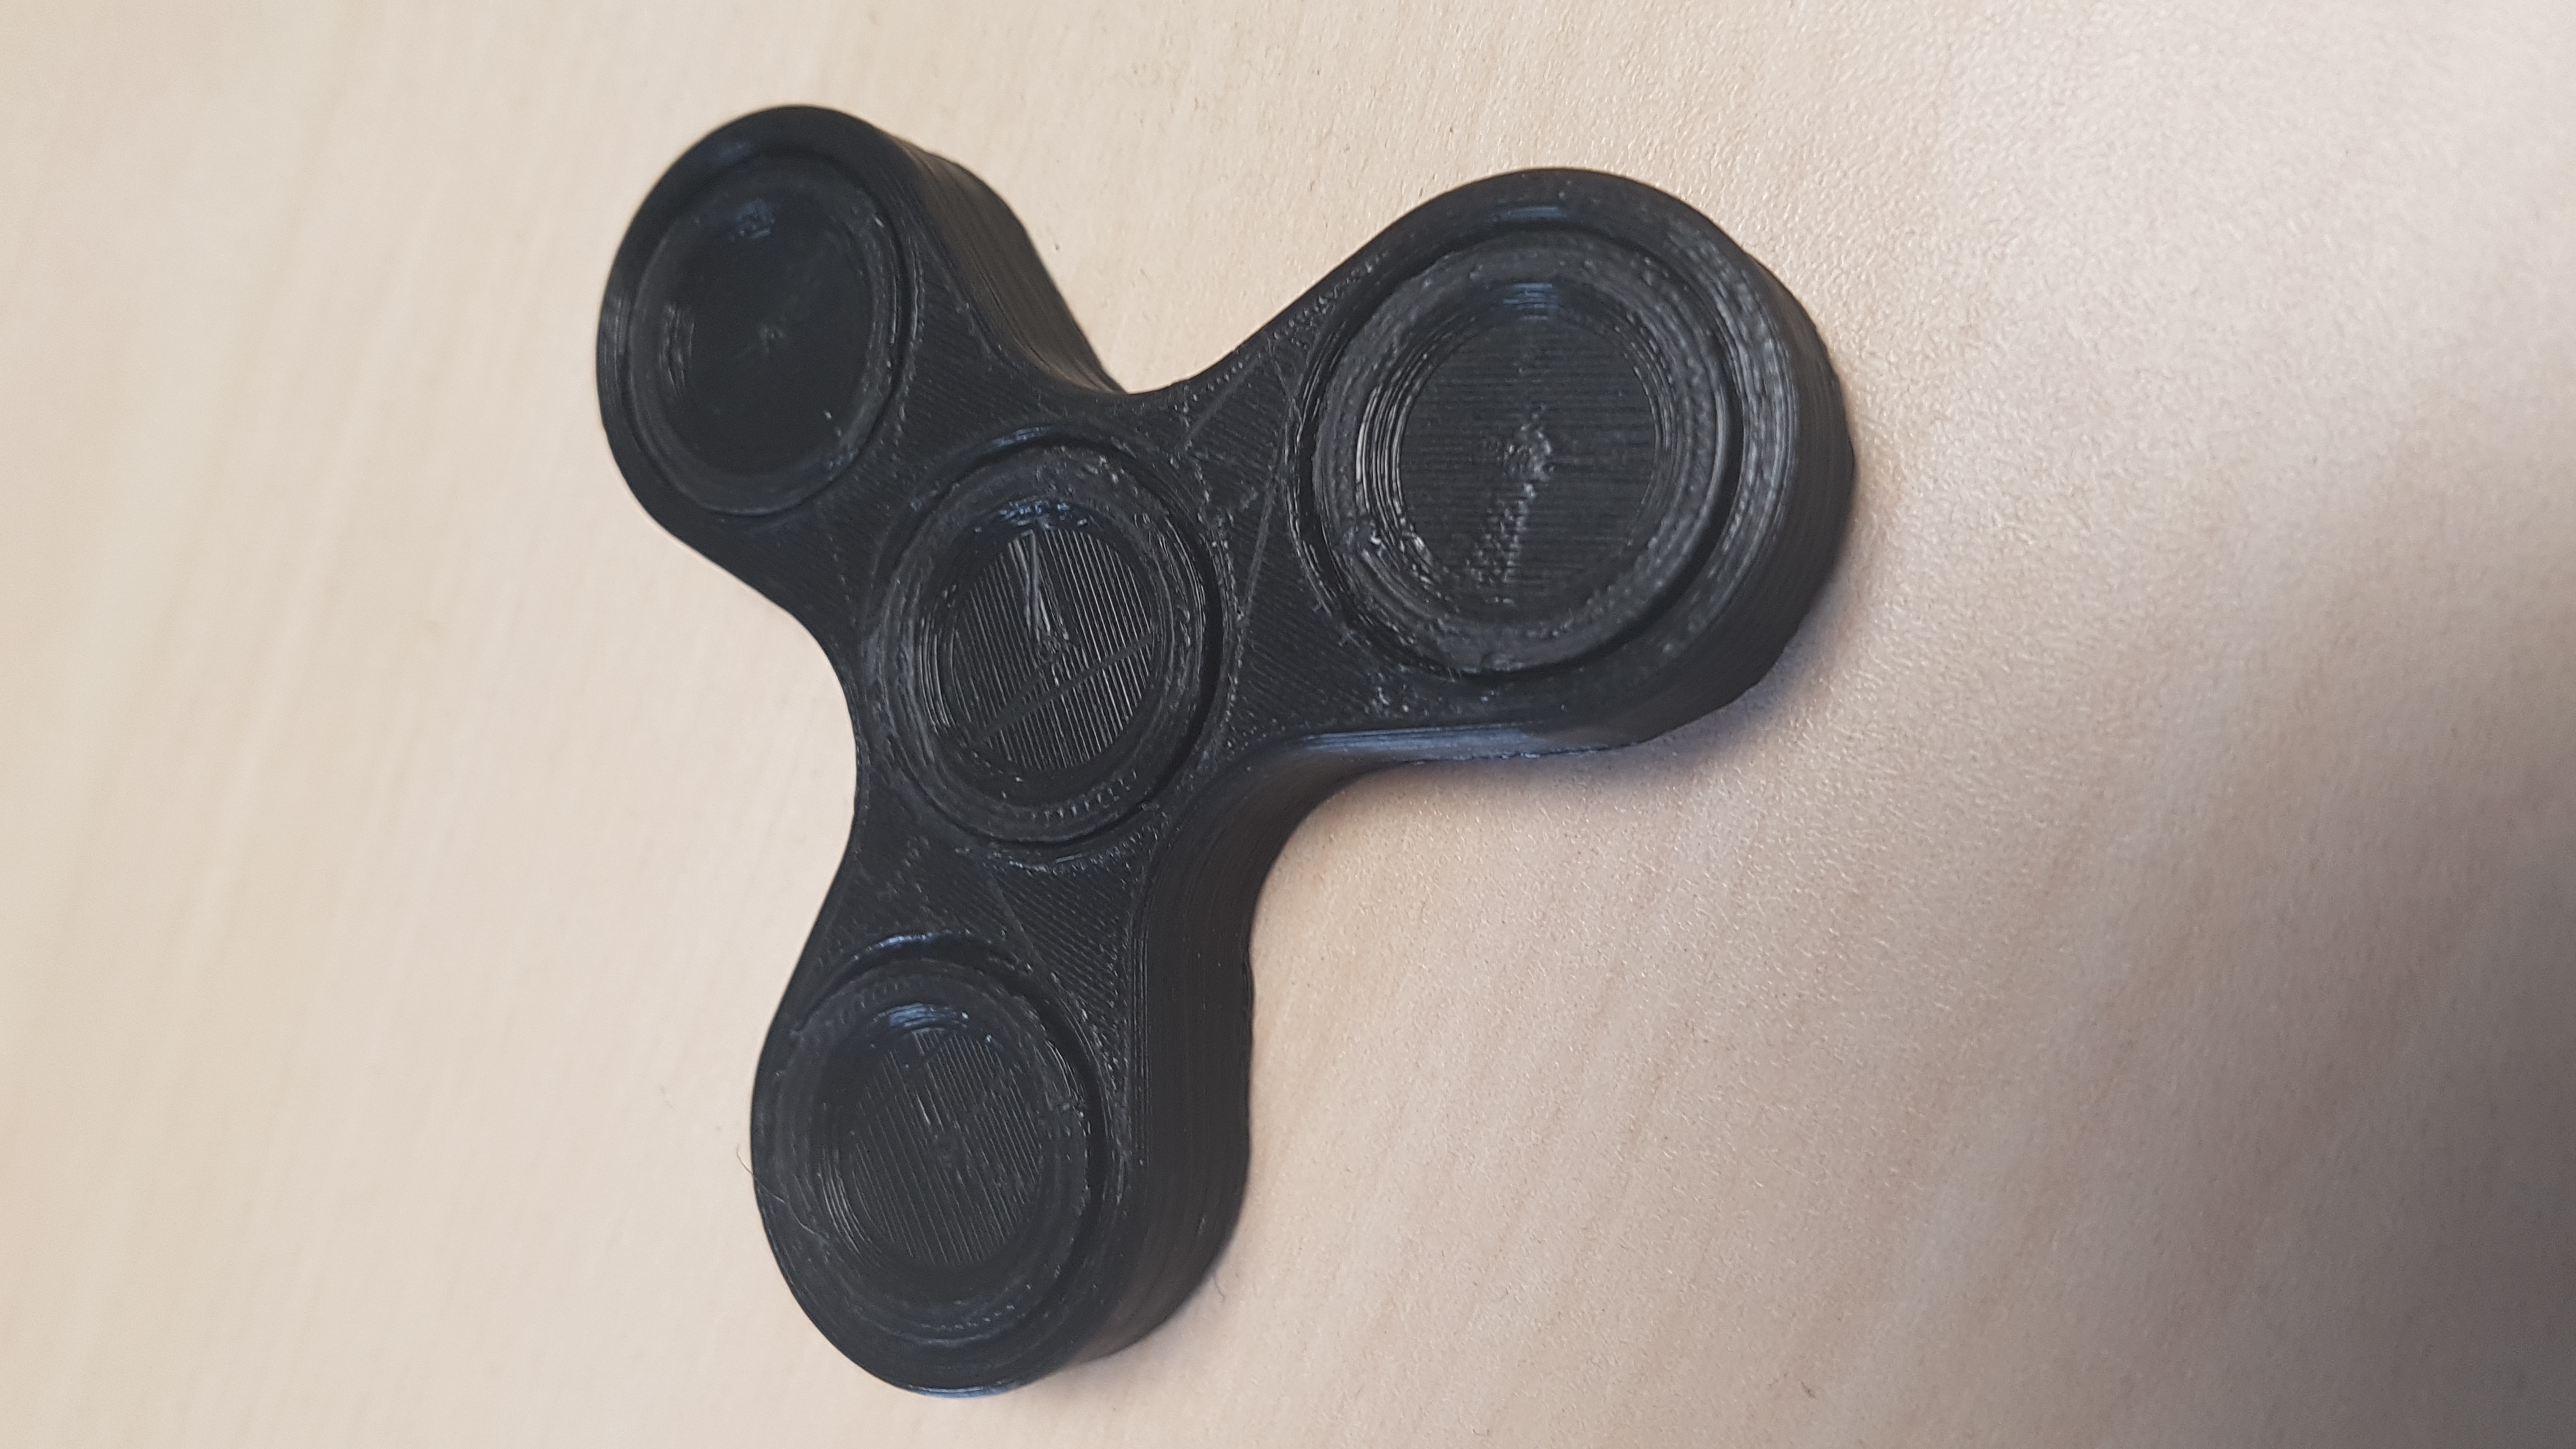 3d Printable Fidget Spinner One Piece Print No Bearings Required By Muzz64